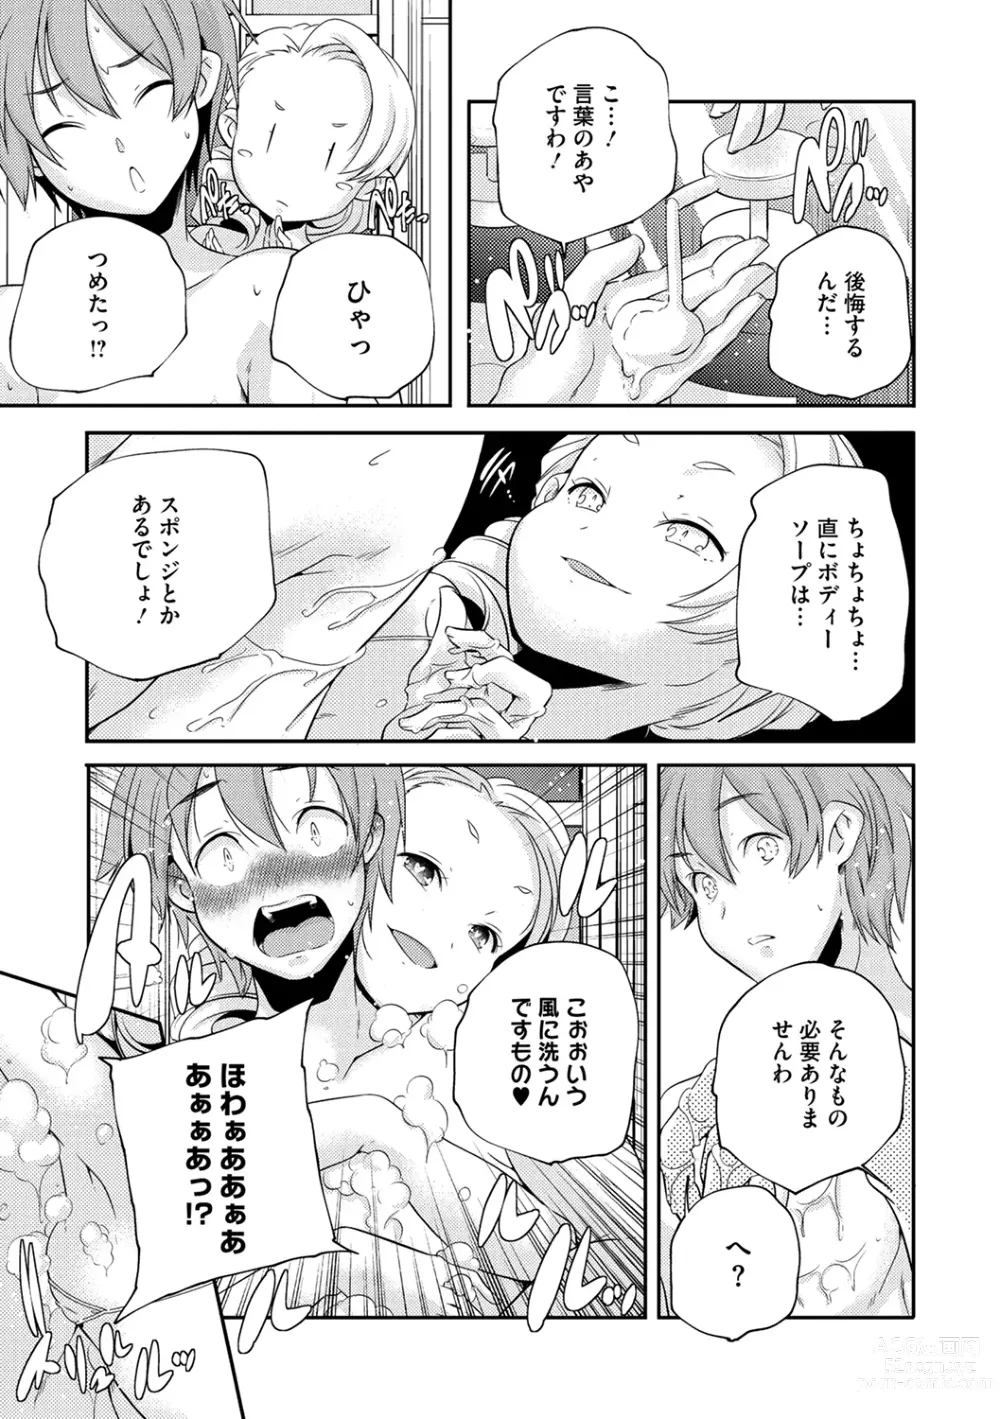 Page 29 of manga LQ -Little Queen- Vol. 52